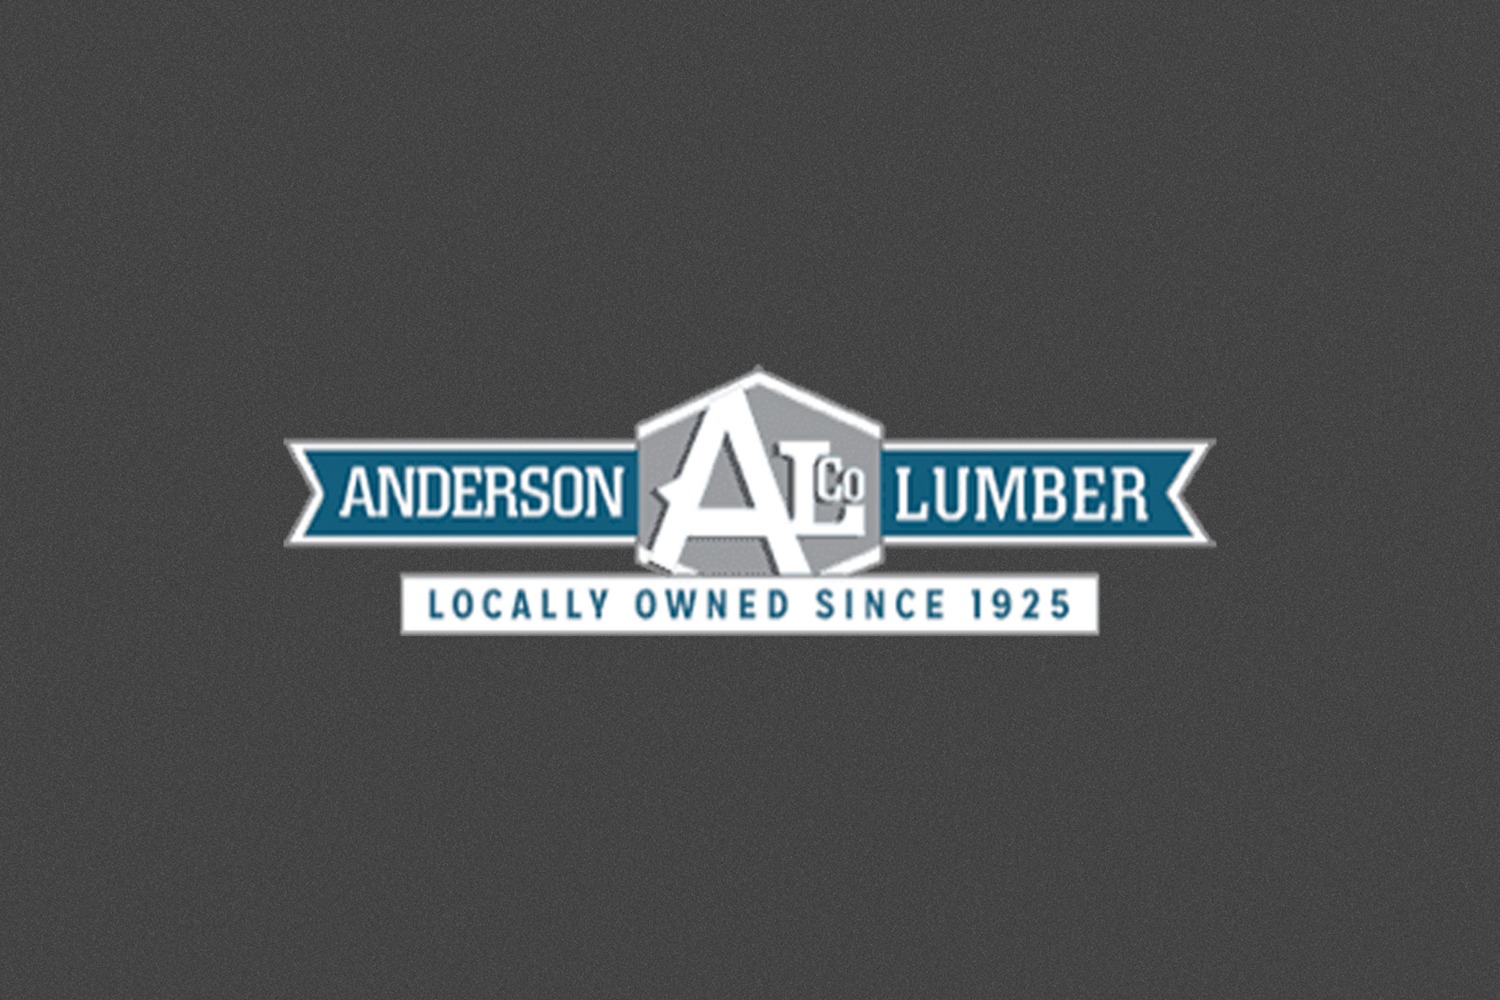 Read our comprehensive review of Anderson Lumber, a trusted provider of high-quality lumber and building materials in Alcoa, TN. Discover their commitment to quality, extensive product range, and exceptional customer service. Partner with Gott Marketing for all your marketing needs in the construction industry.